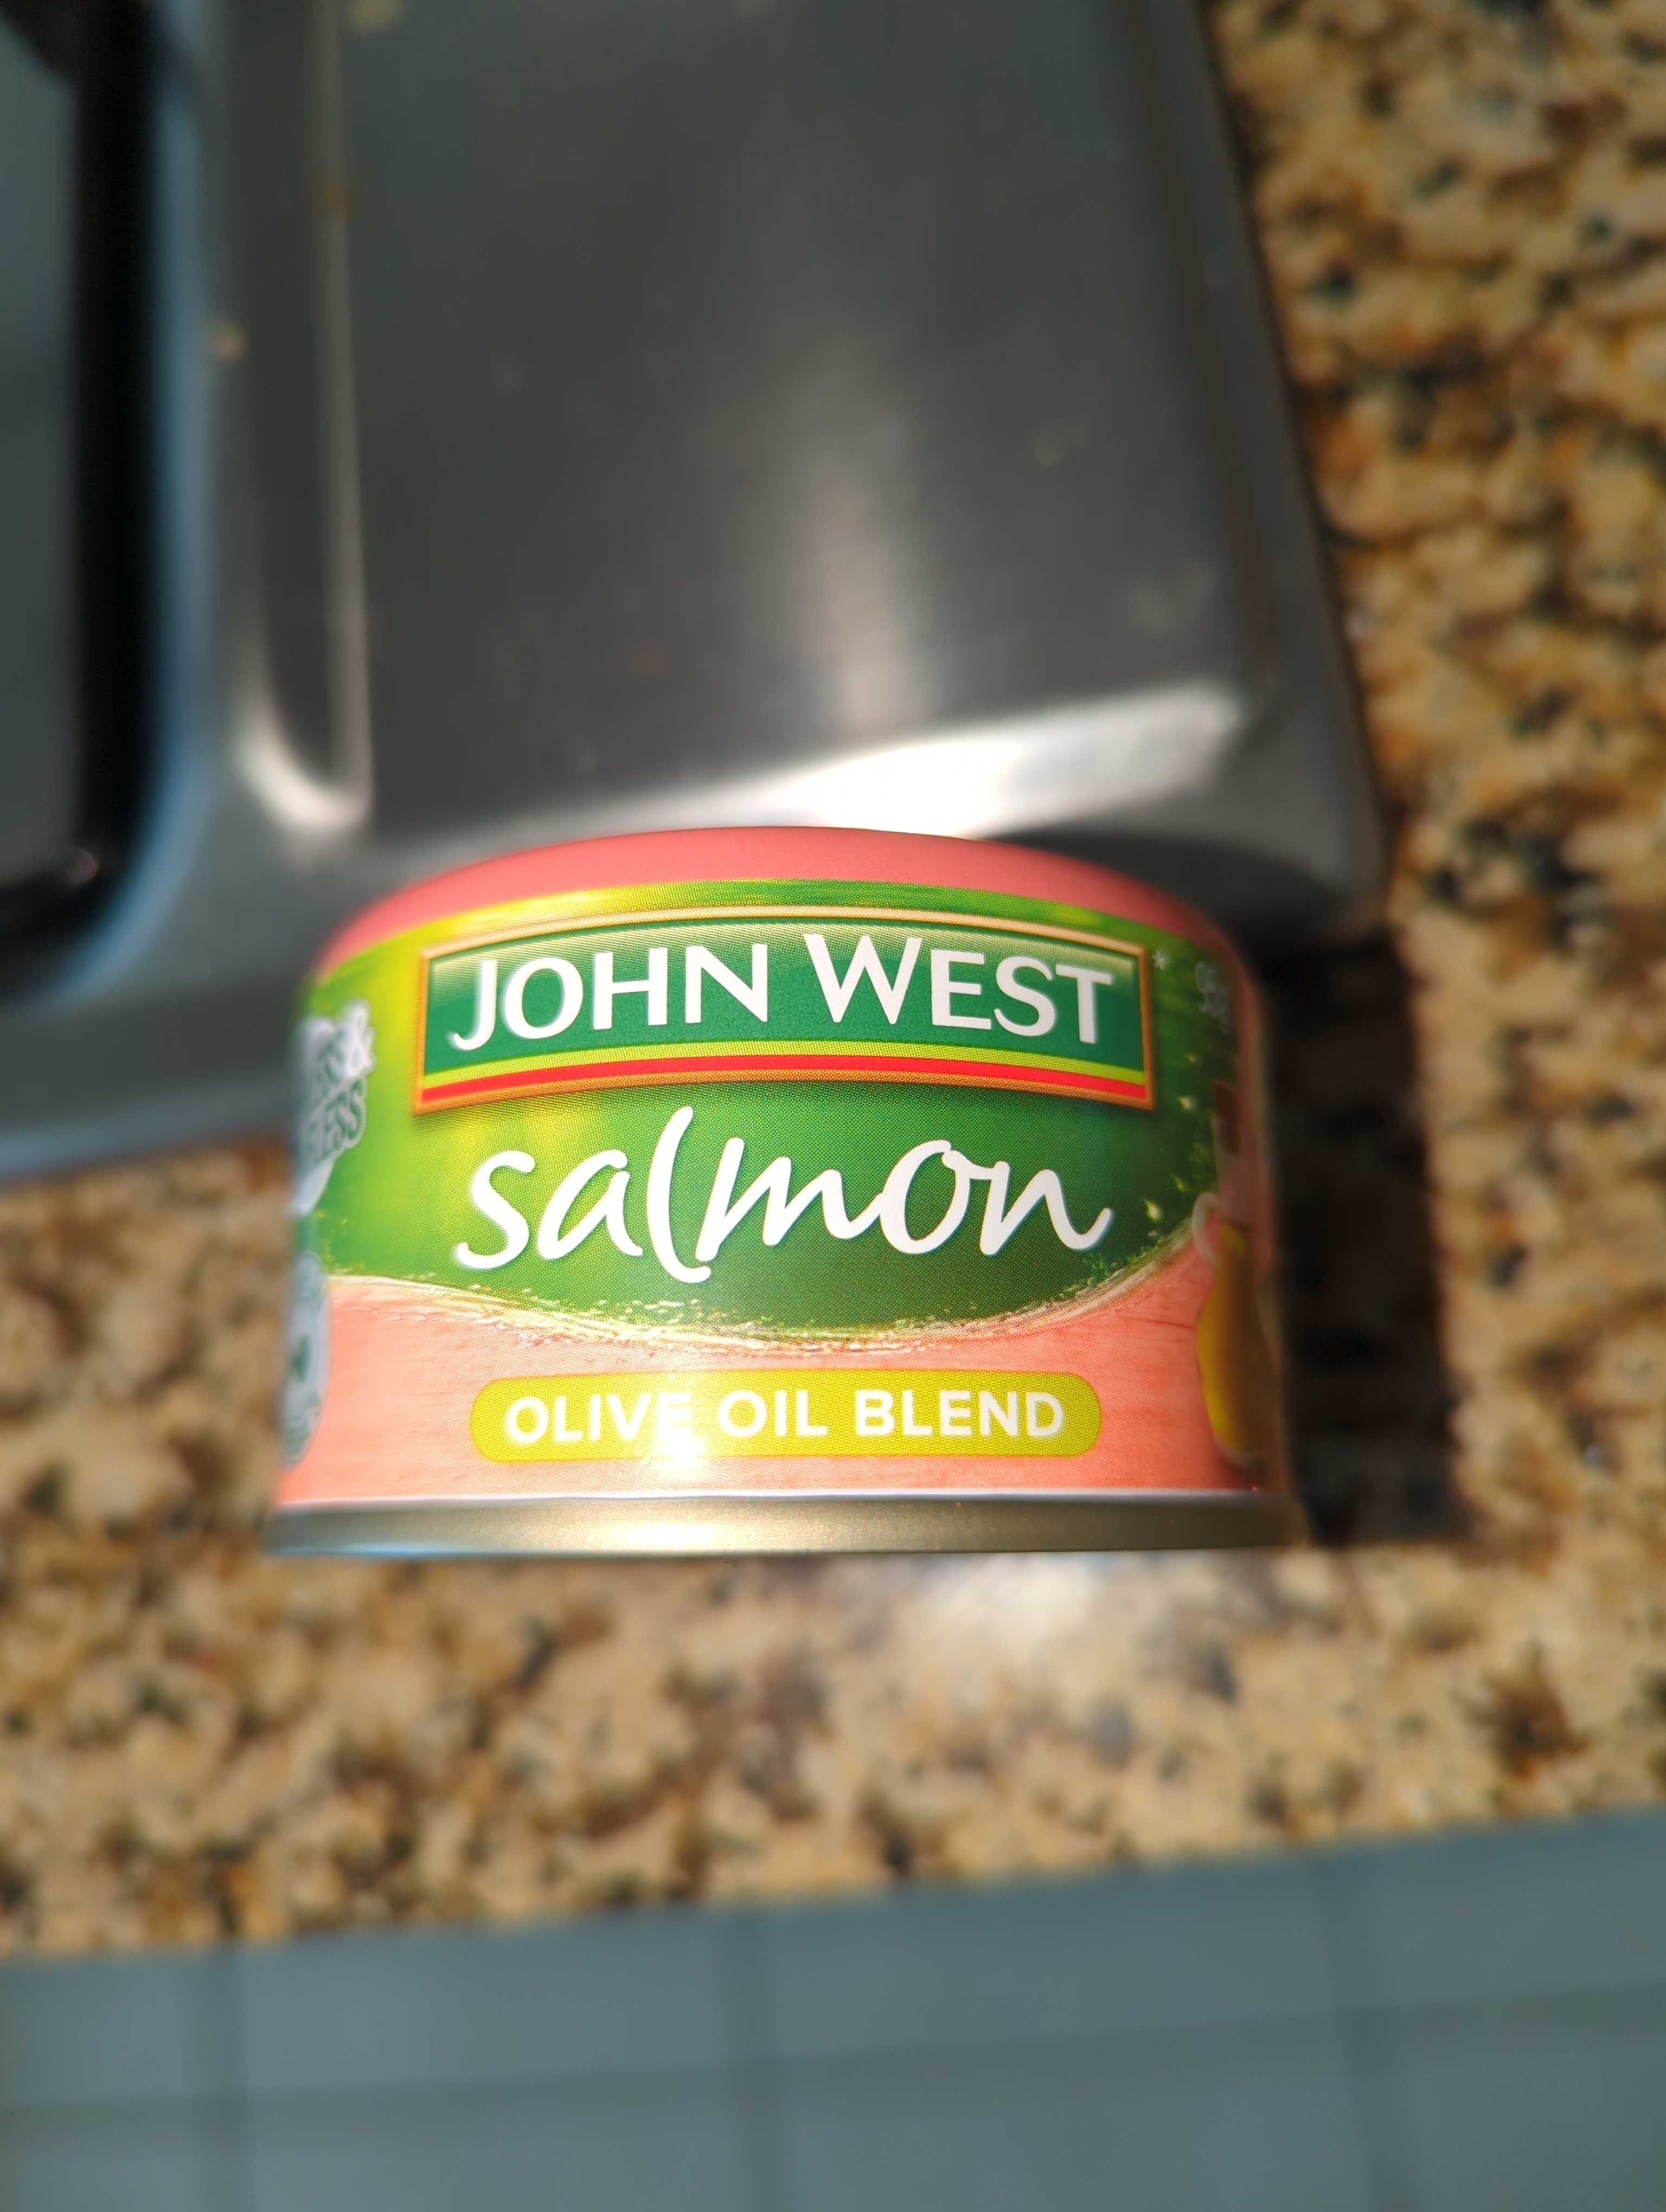 Tinned Salmon - Olive Oil Blend - Product